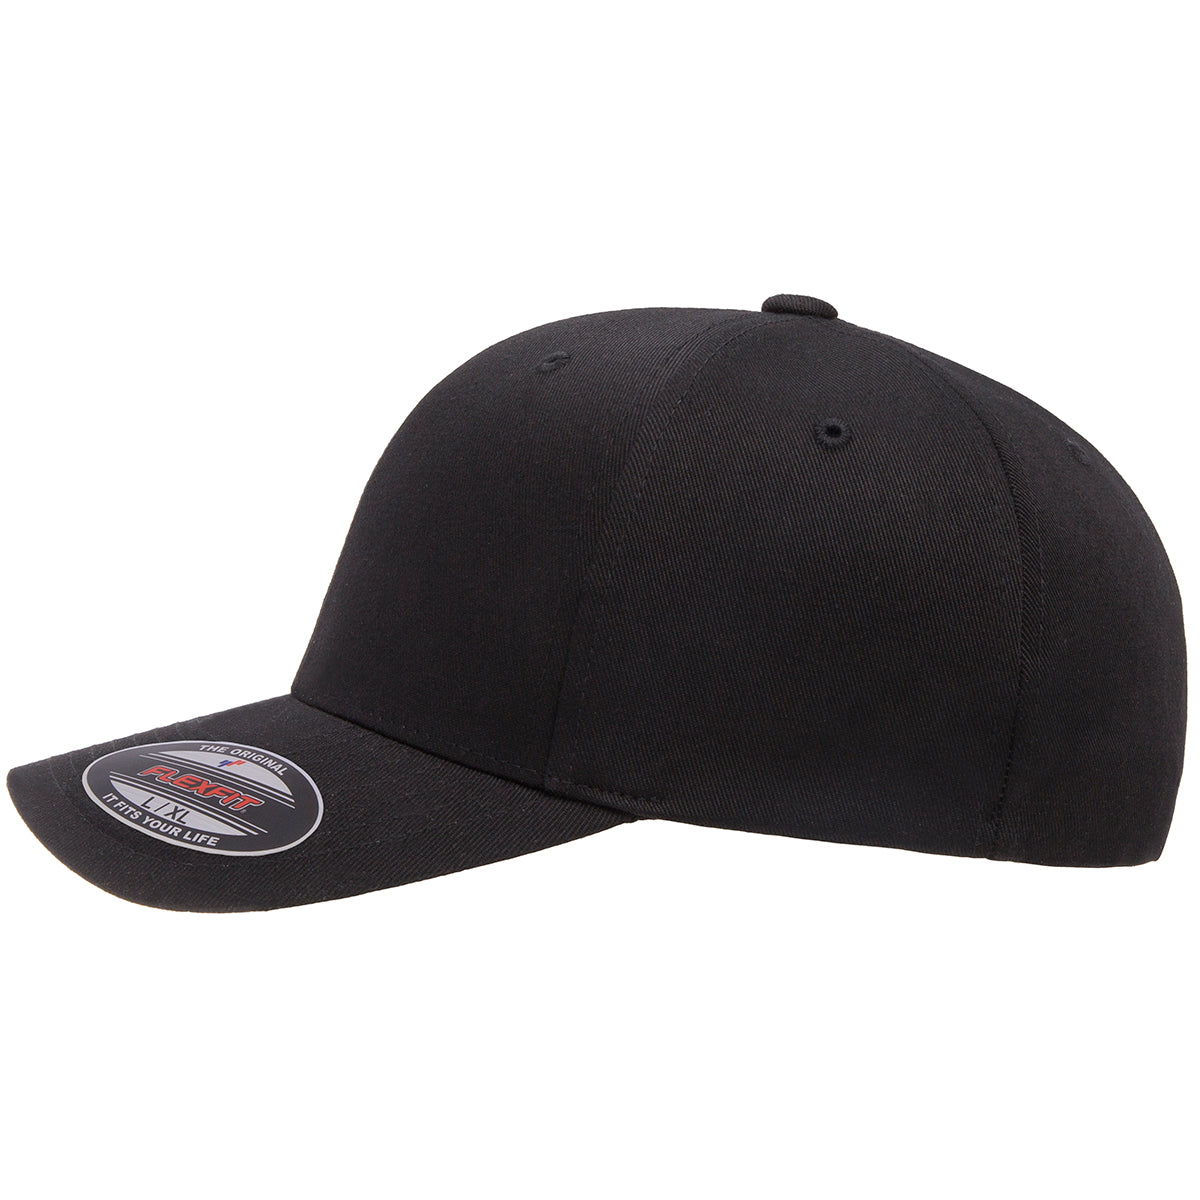 Custom Embroidered Flexfit 6277 Wooly Combed Cotton Blend Cap